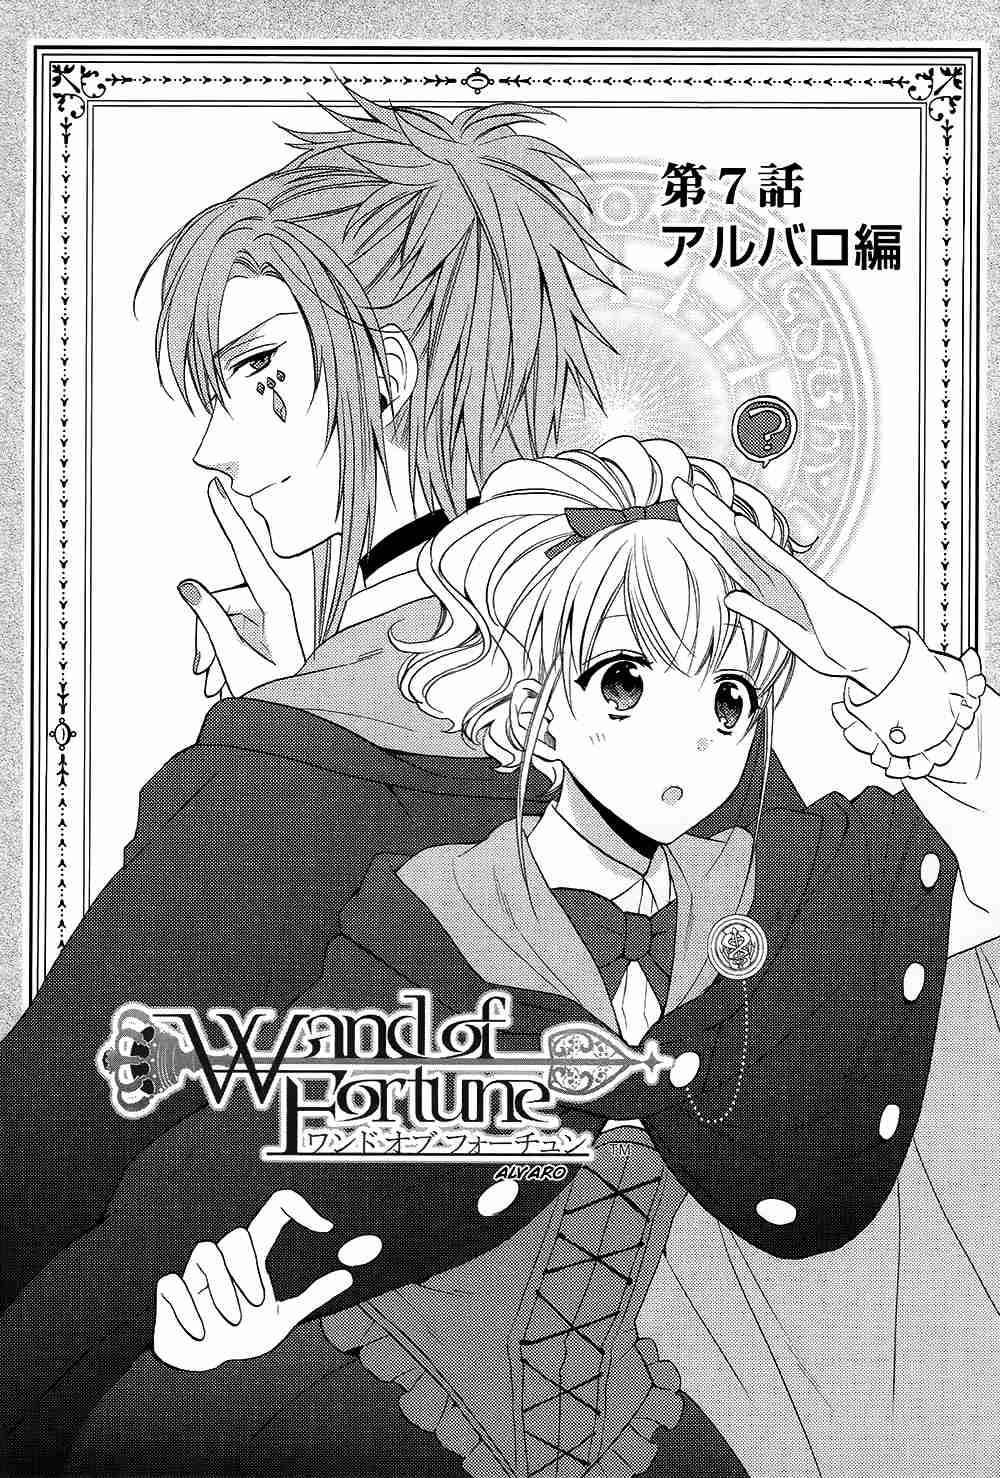 Wand of Fortune Vol. 1 Ch. 7 (END)